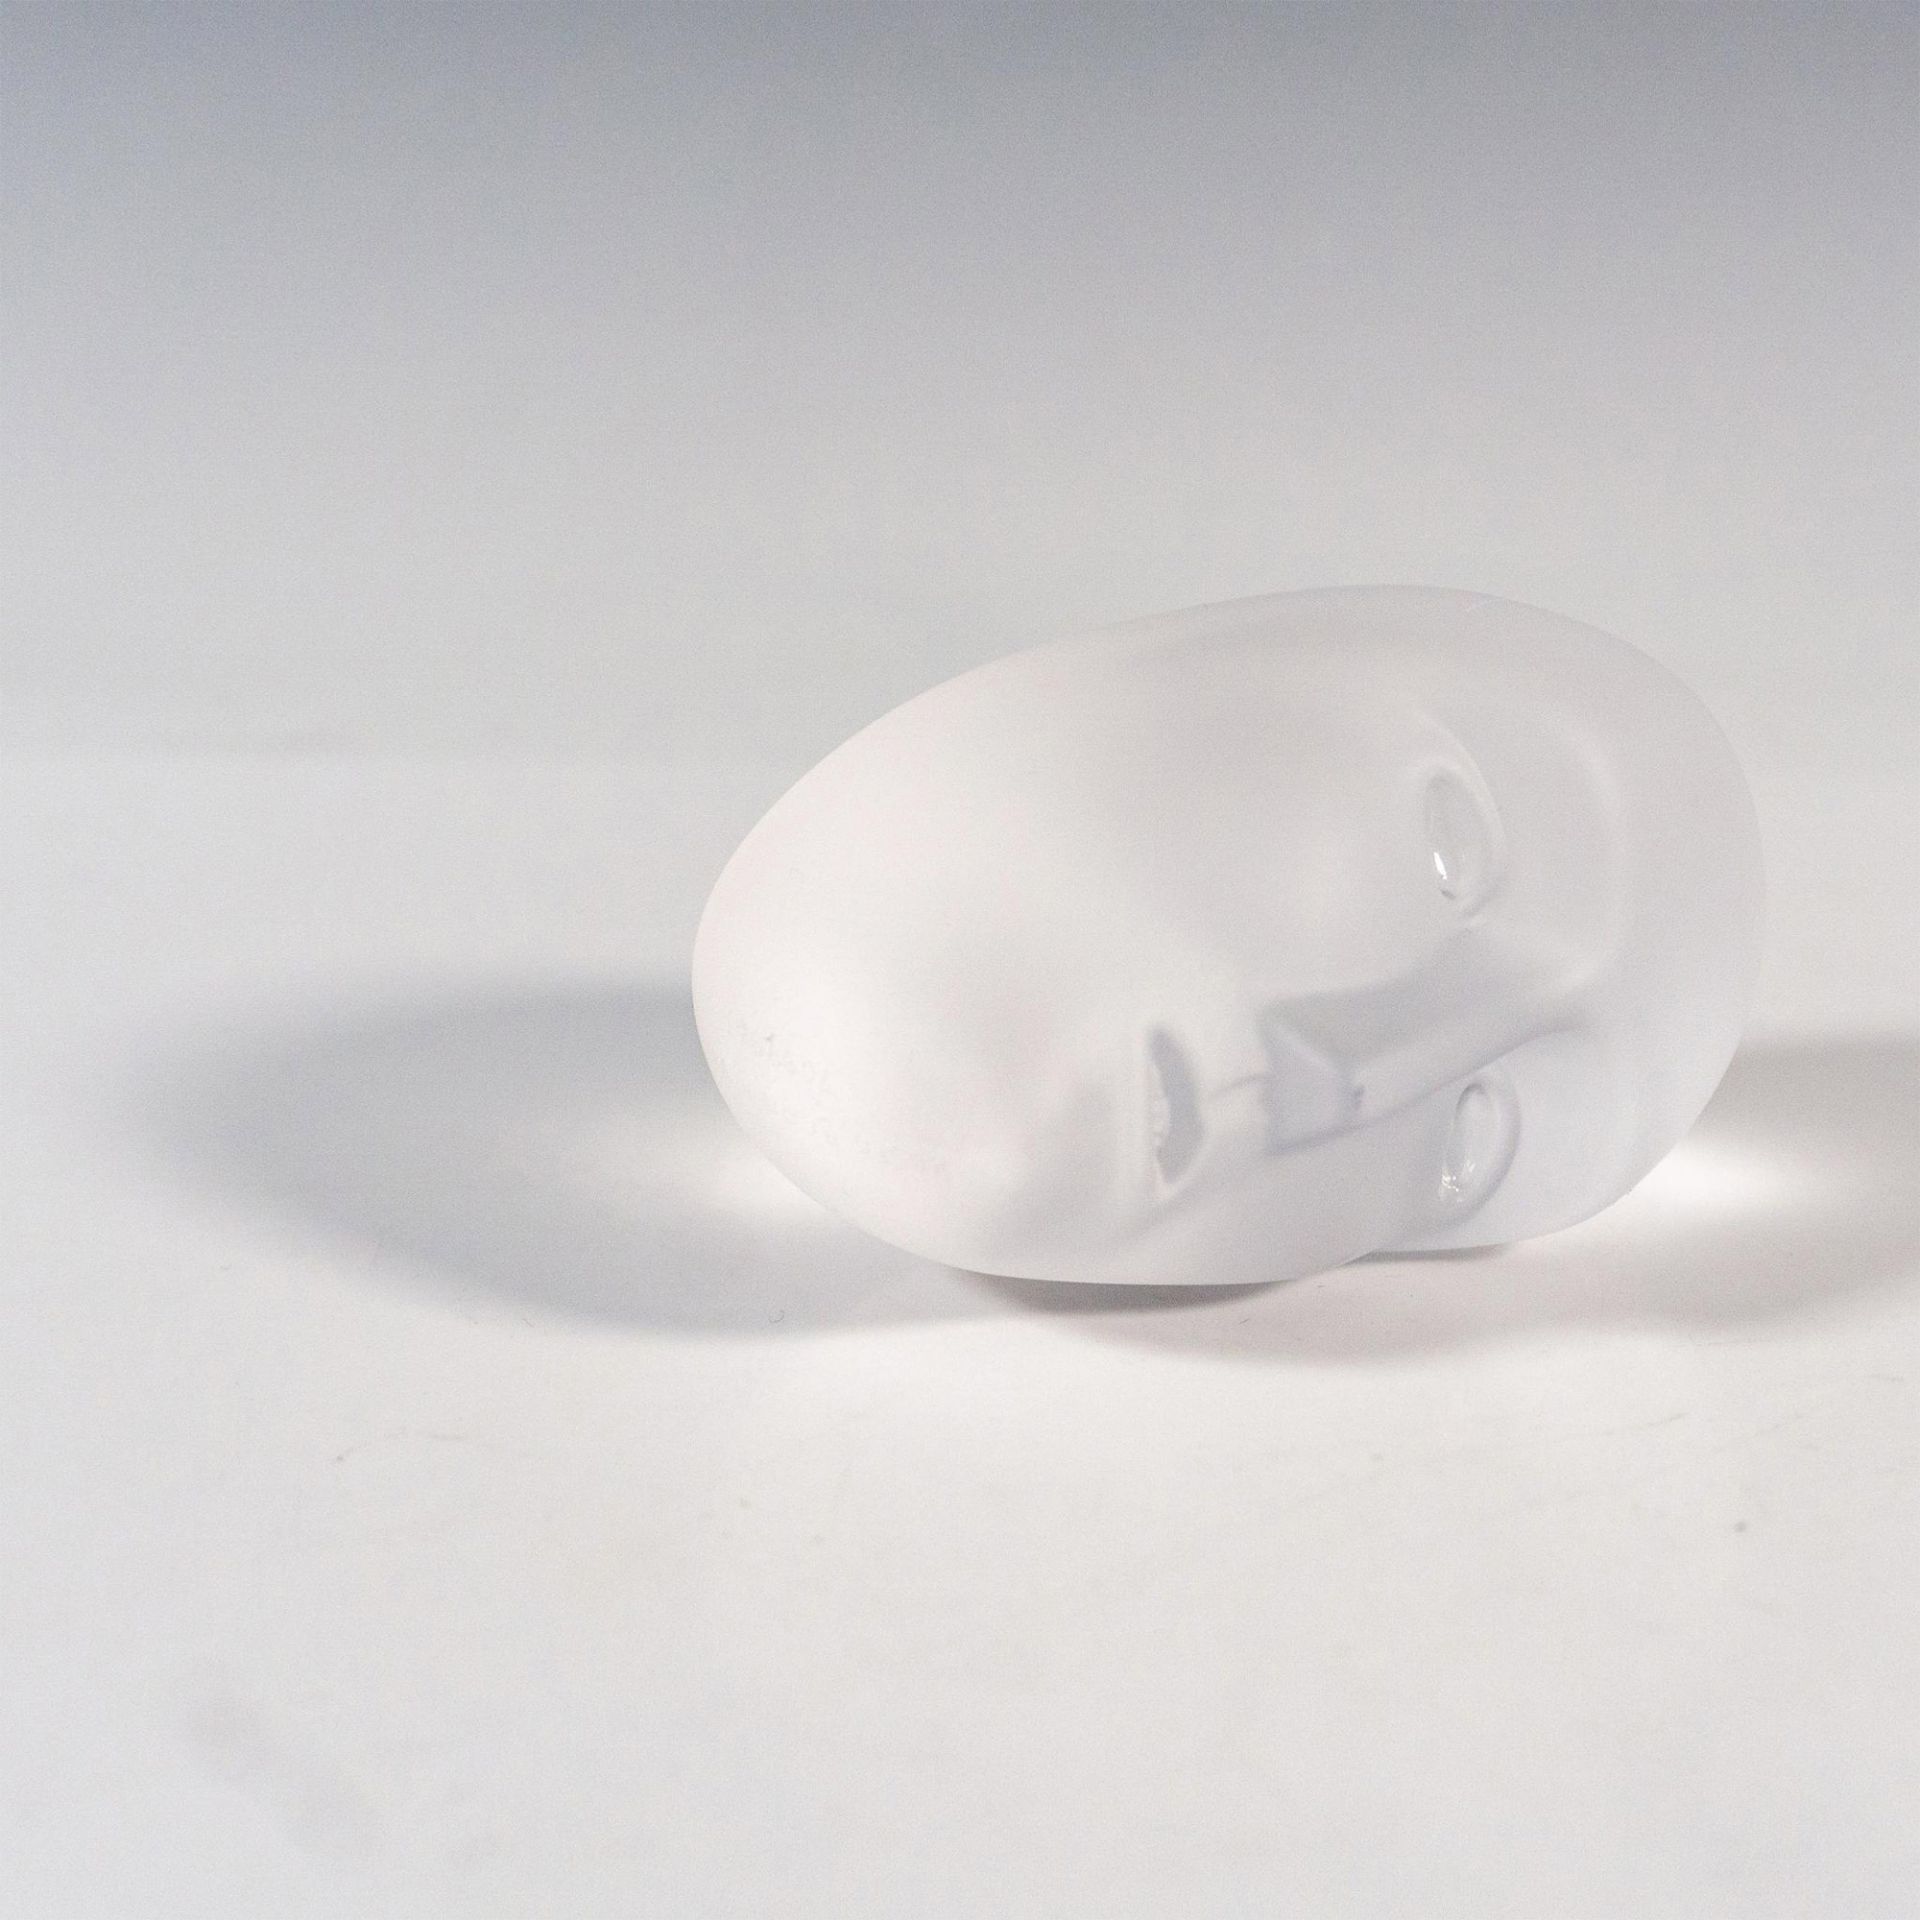 Kosta Boda Crystal Paperweight, Brains - Image 3 of 4